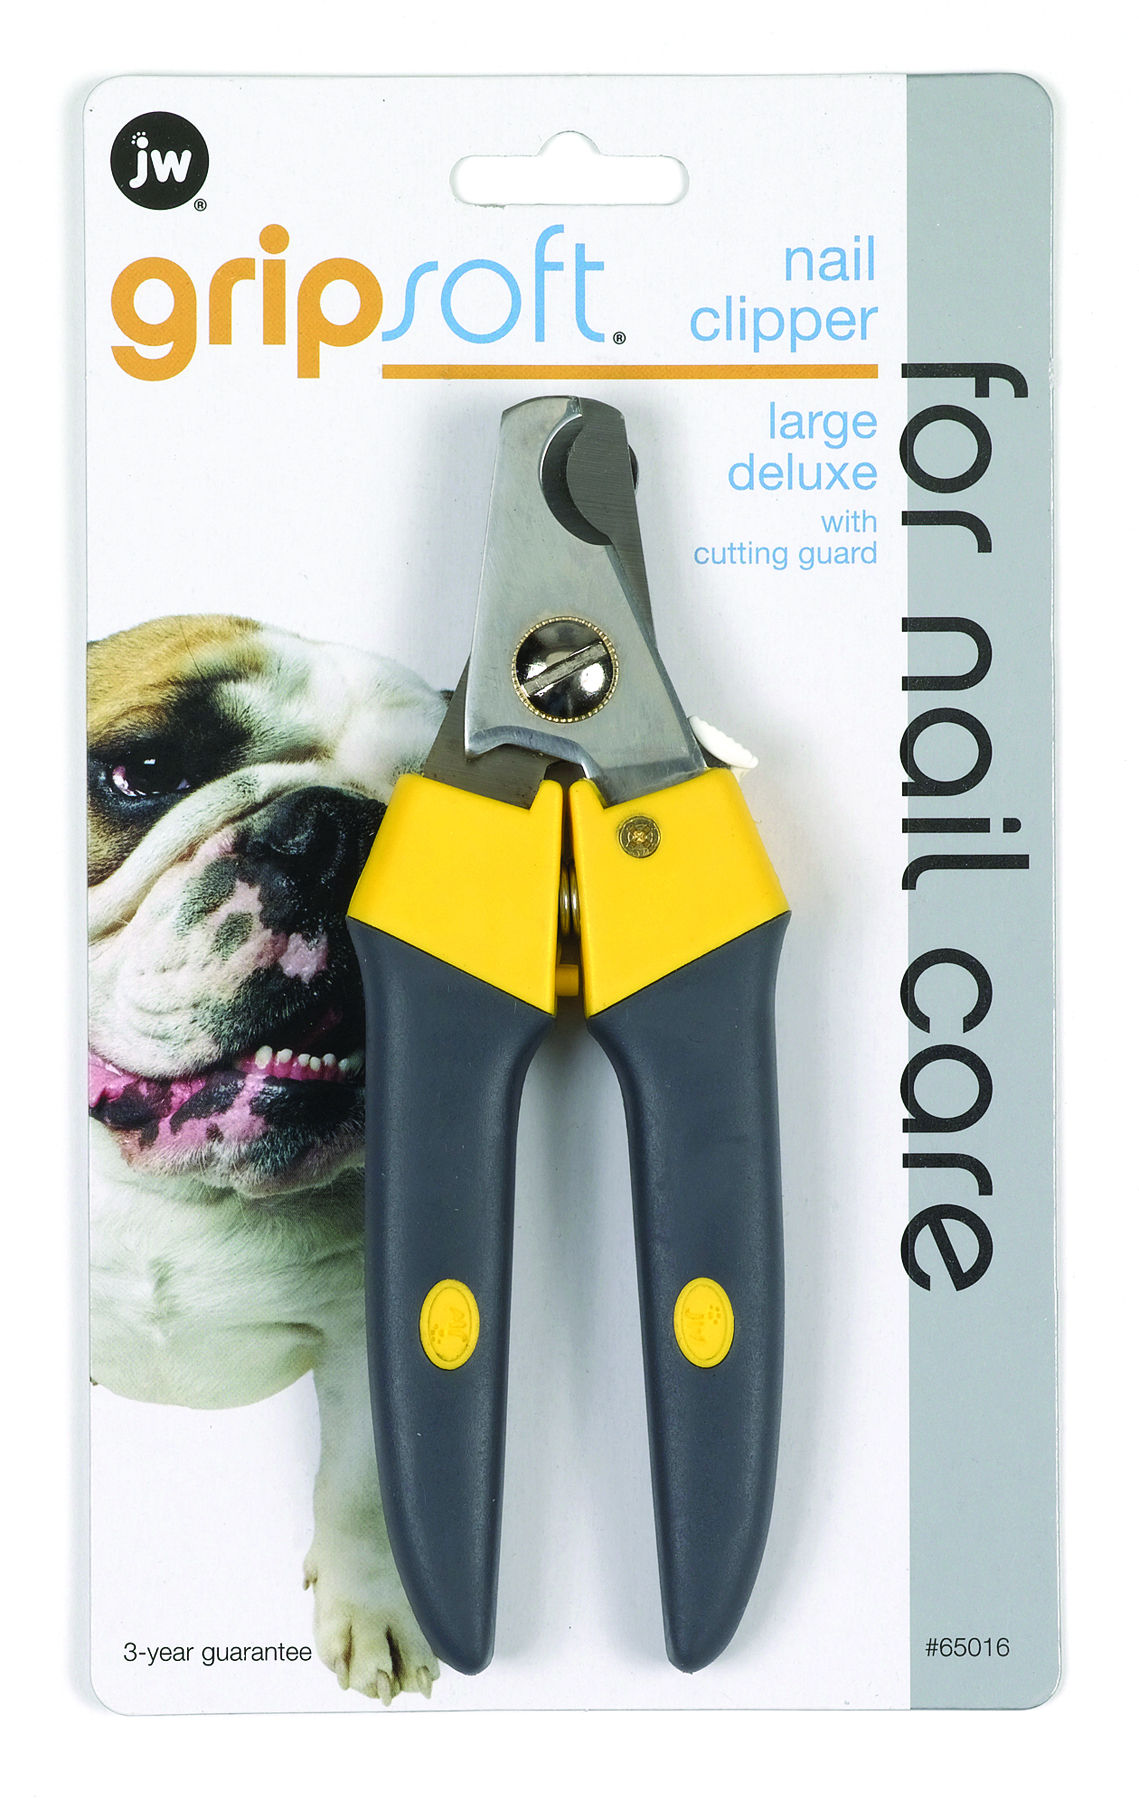 Large Deluxe Nail Clipper